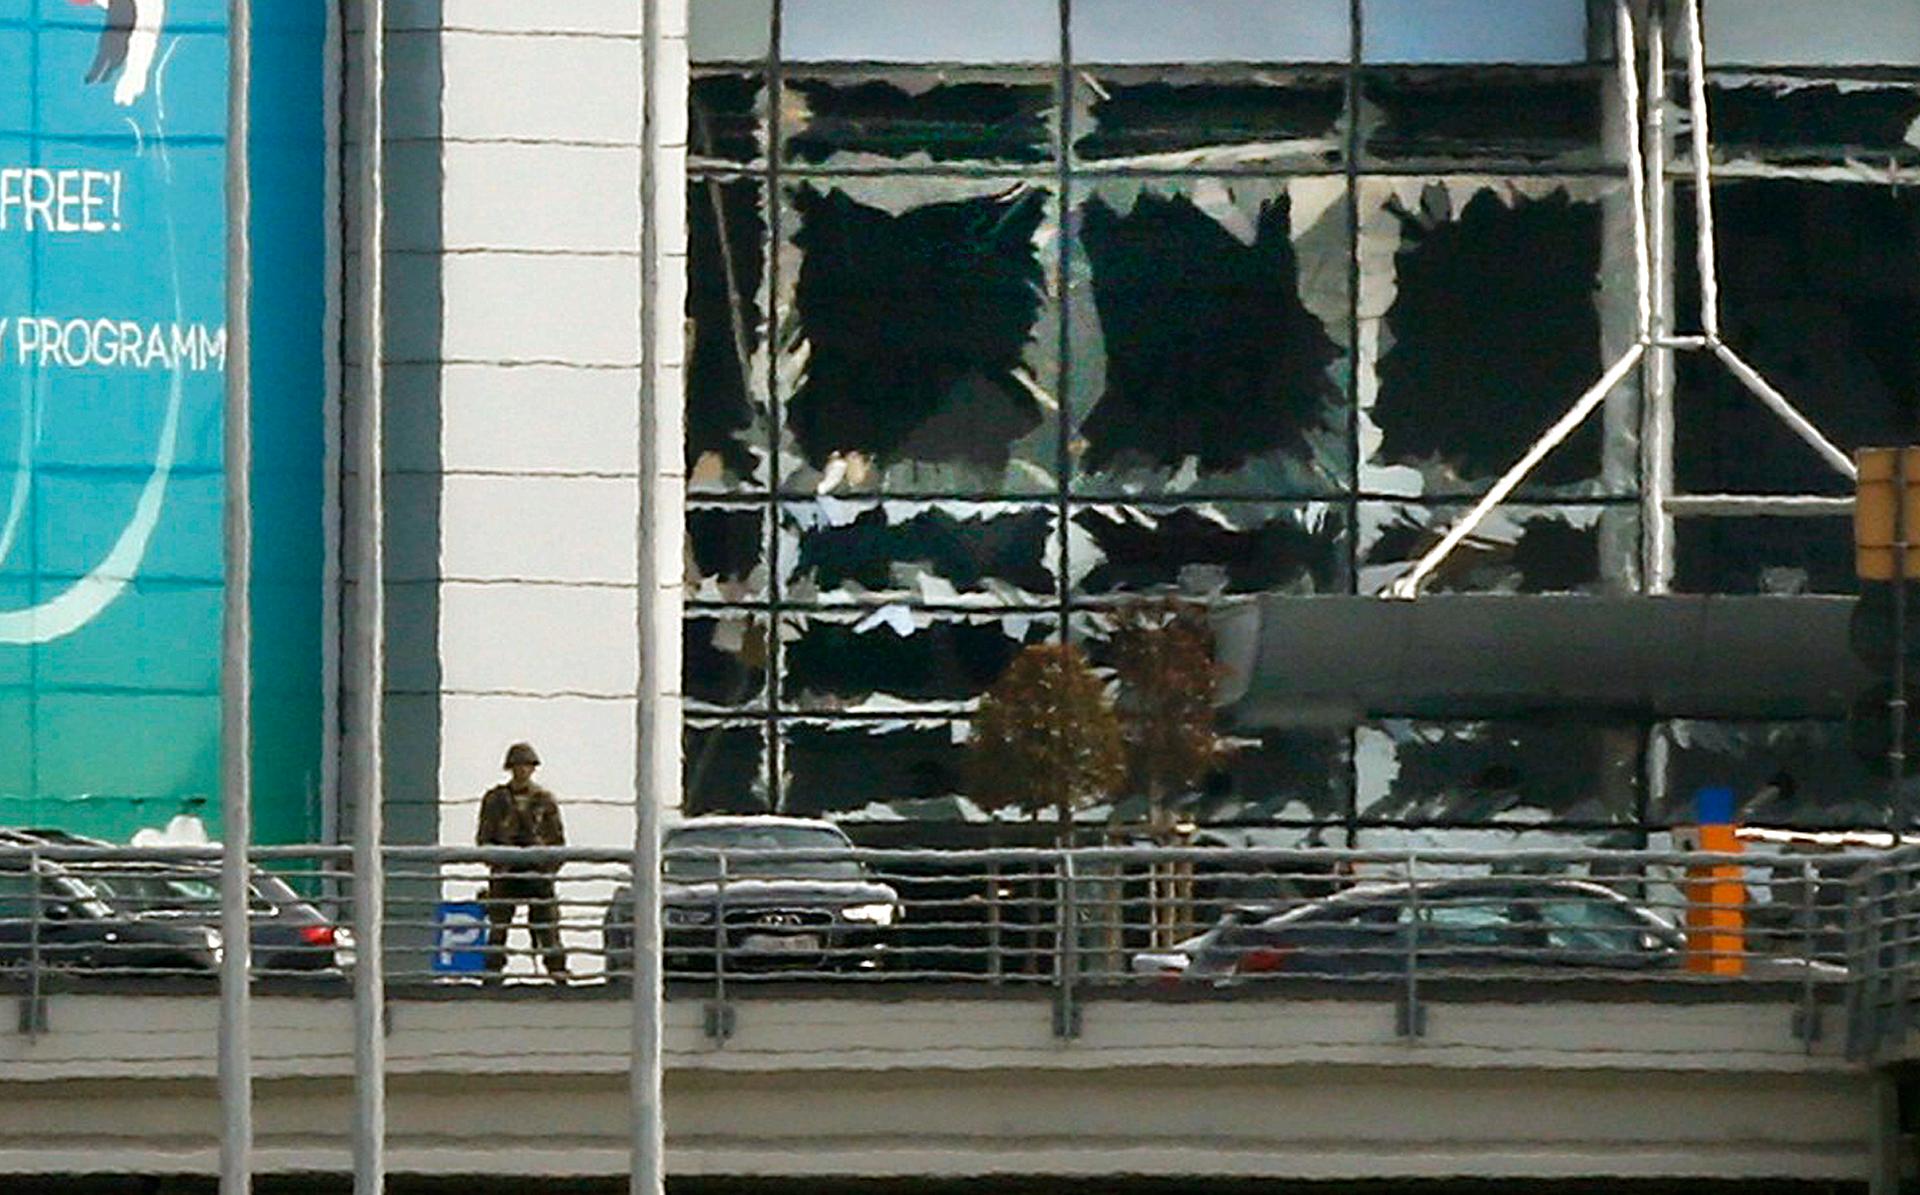 A soldier stands near broken windows after explosions at Zaventem airport near Brussels